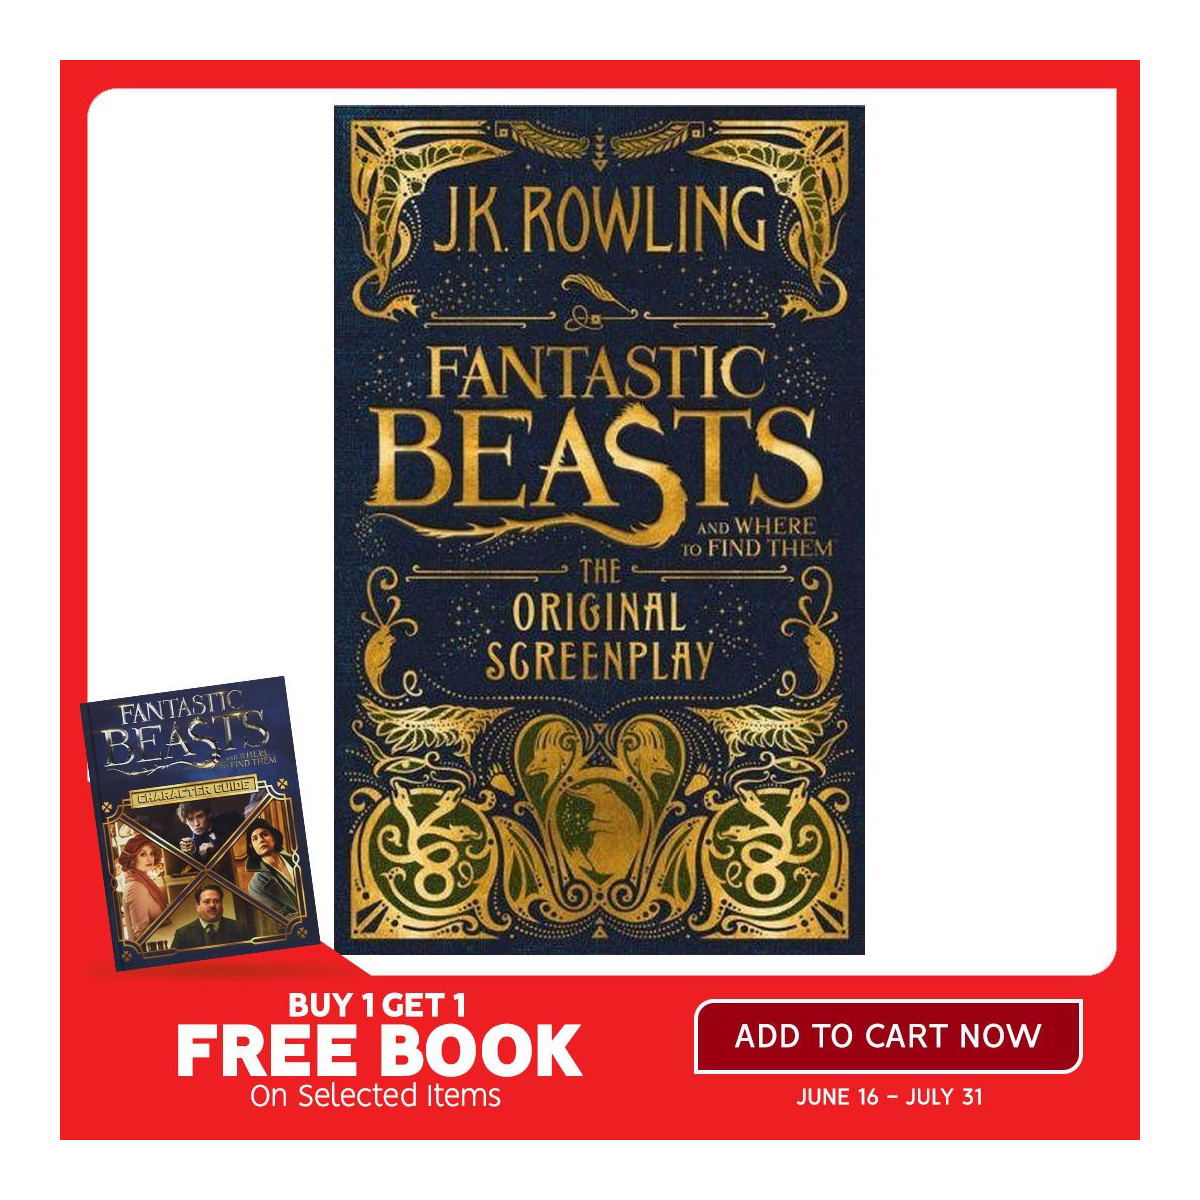 FANTASTIC BEASTS AND WHERE TO FIND THEM THE ORIGINAL SCREENPLAY